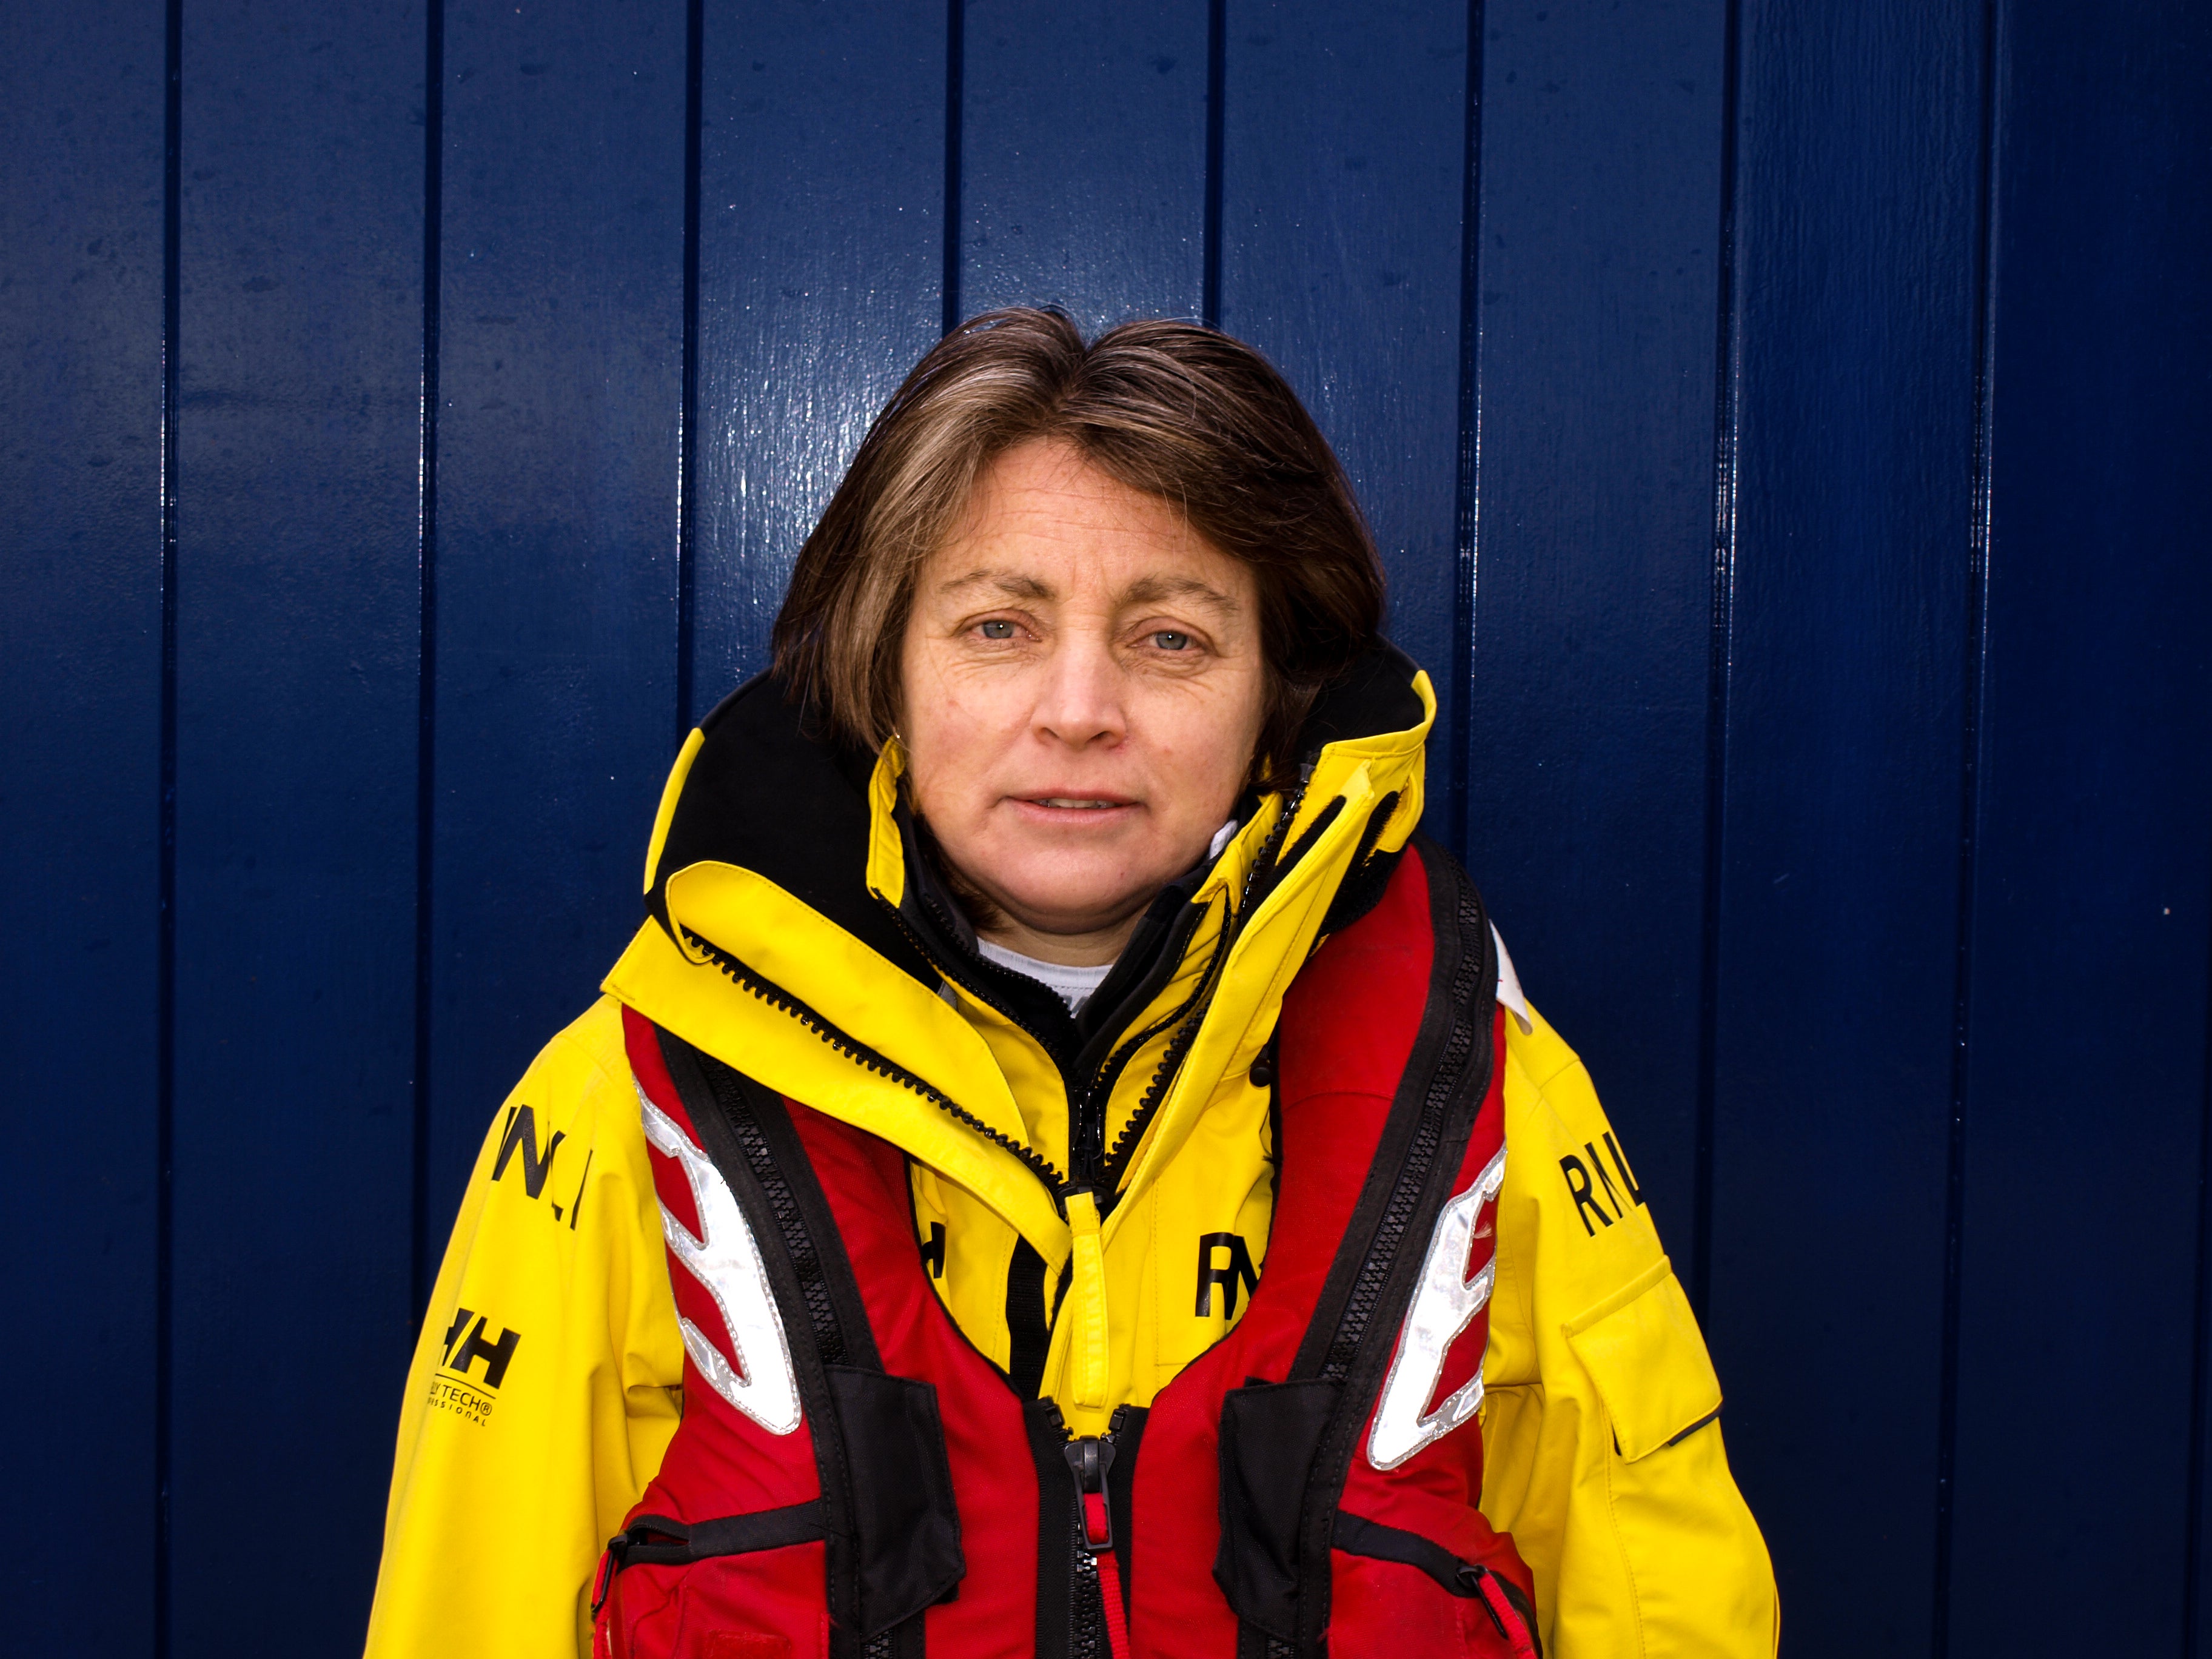 Di Bush has become the first woman to be appointed coxswain in the lifeboat charity’s 197-year-long history